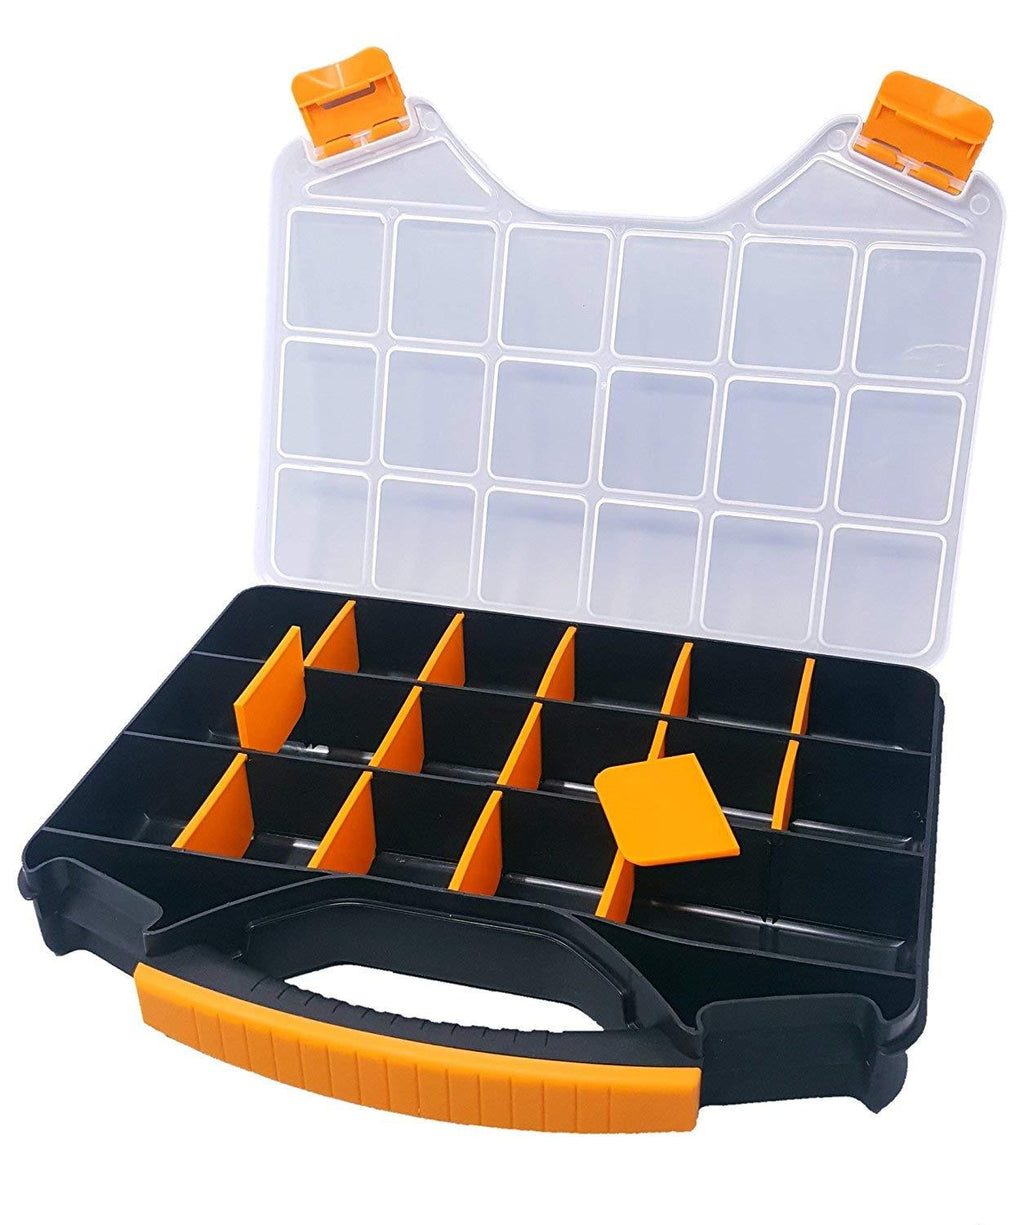 Massca Hardware Box Storage. Hinged Box Made of Durable Plastic in a Slim Design with 18 compartments. Excellent for Screws Nuts and Bolts. - NewNest Australia